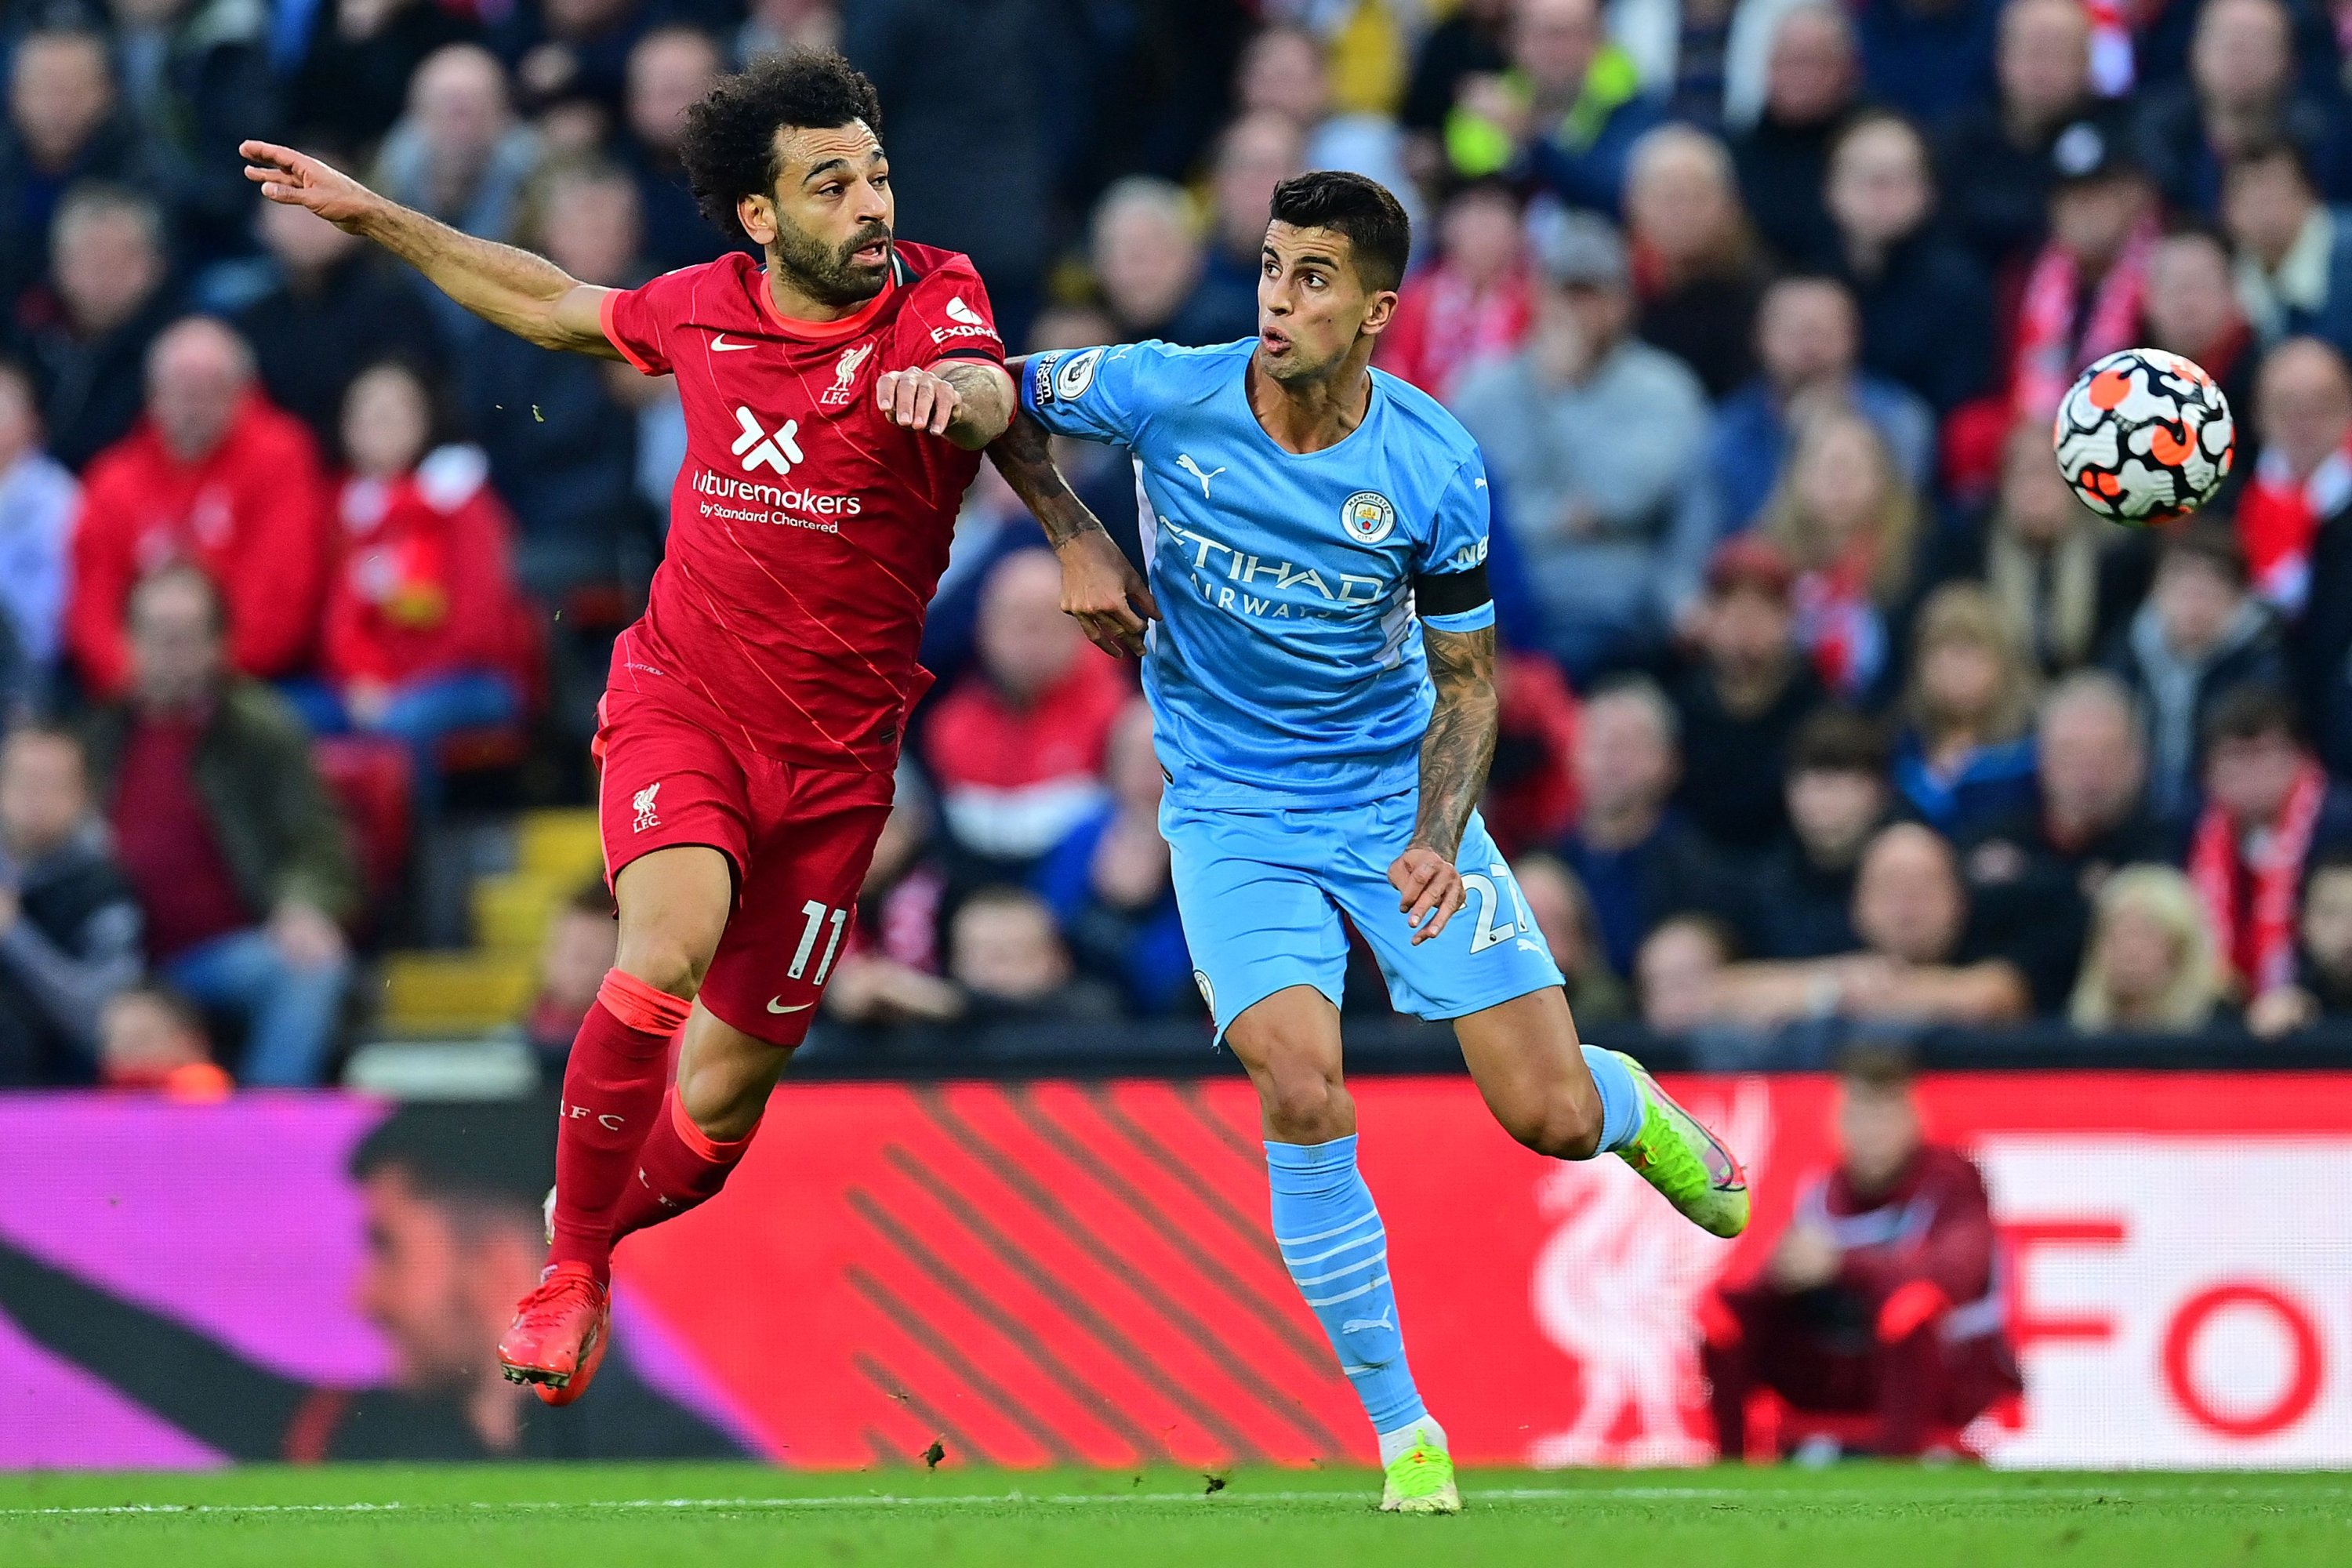 Manchester City vs Liverpool Live: The biggest battle is set for the Premier League title as Man City face Liverpool; Latest Team News, Predicted Lineups, Injury News, Live Streaming